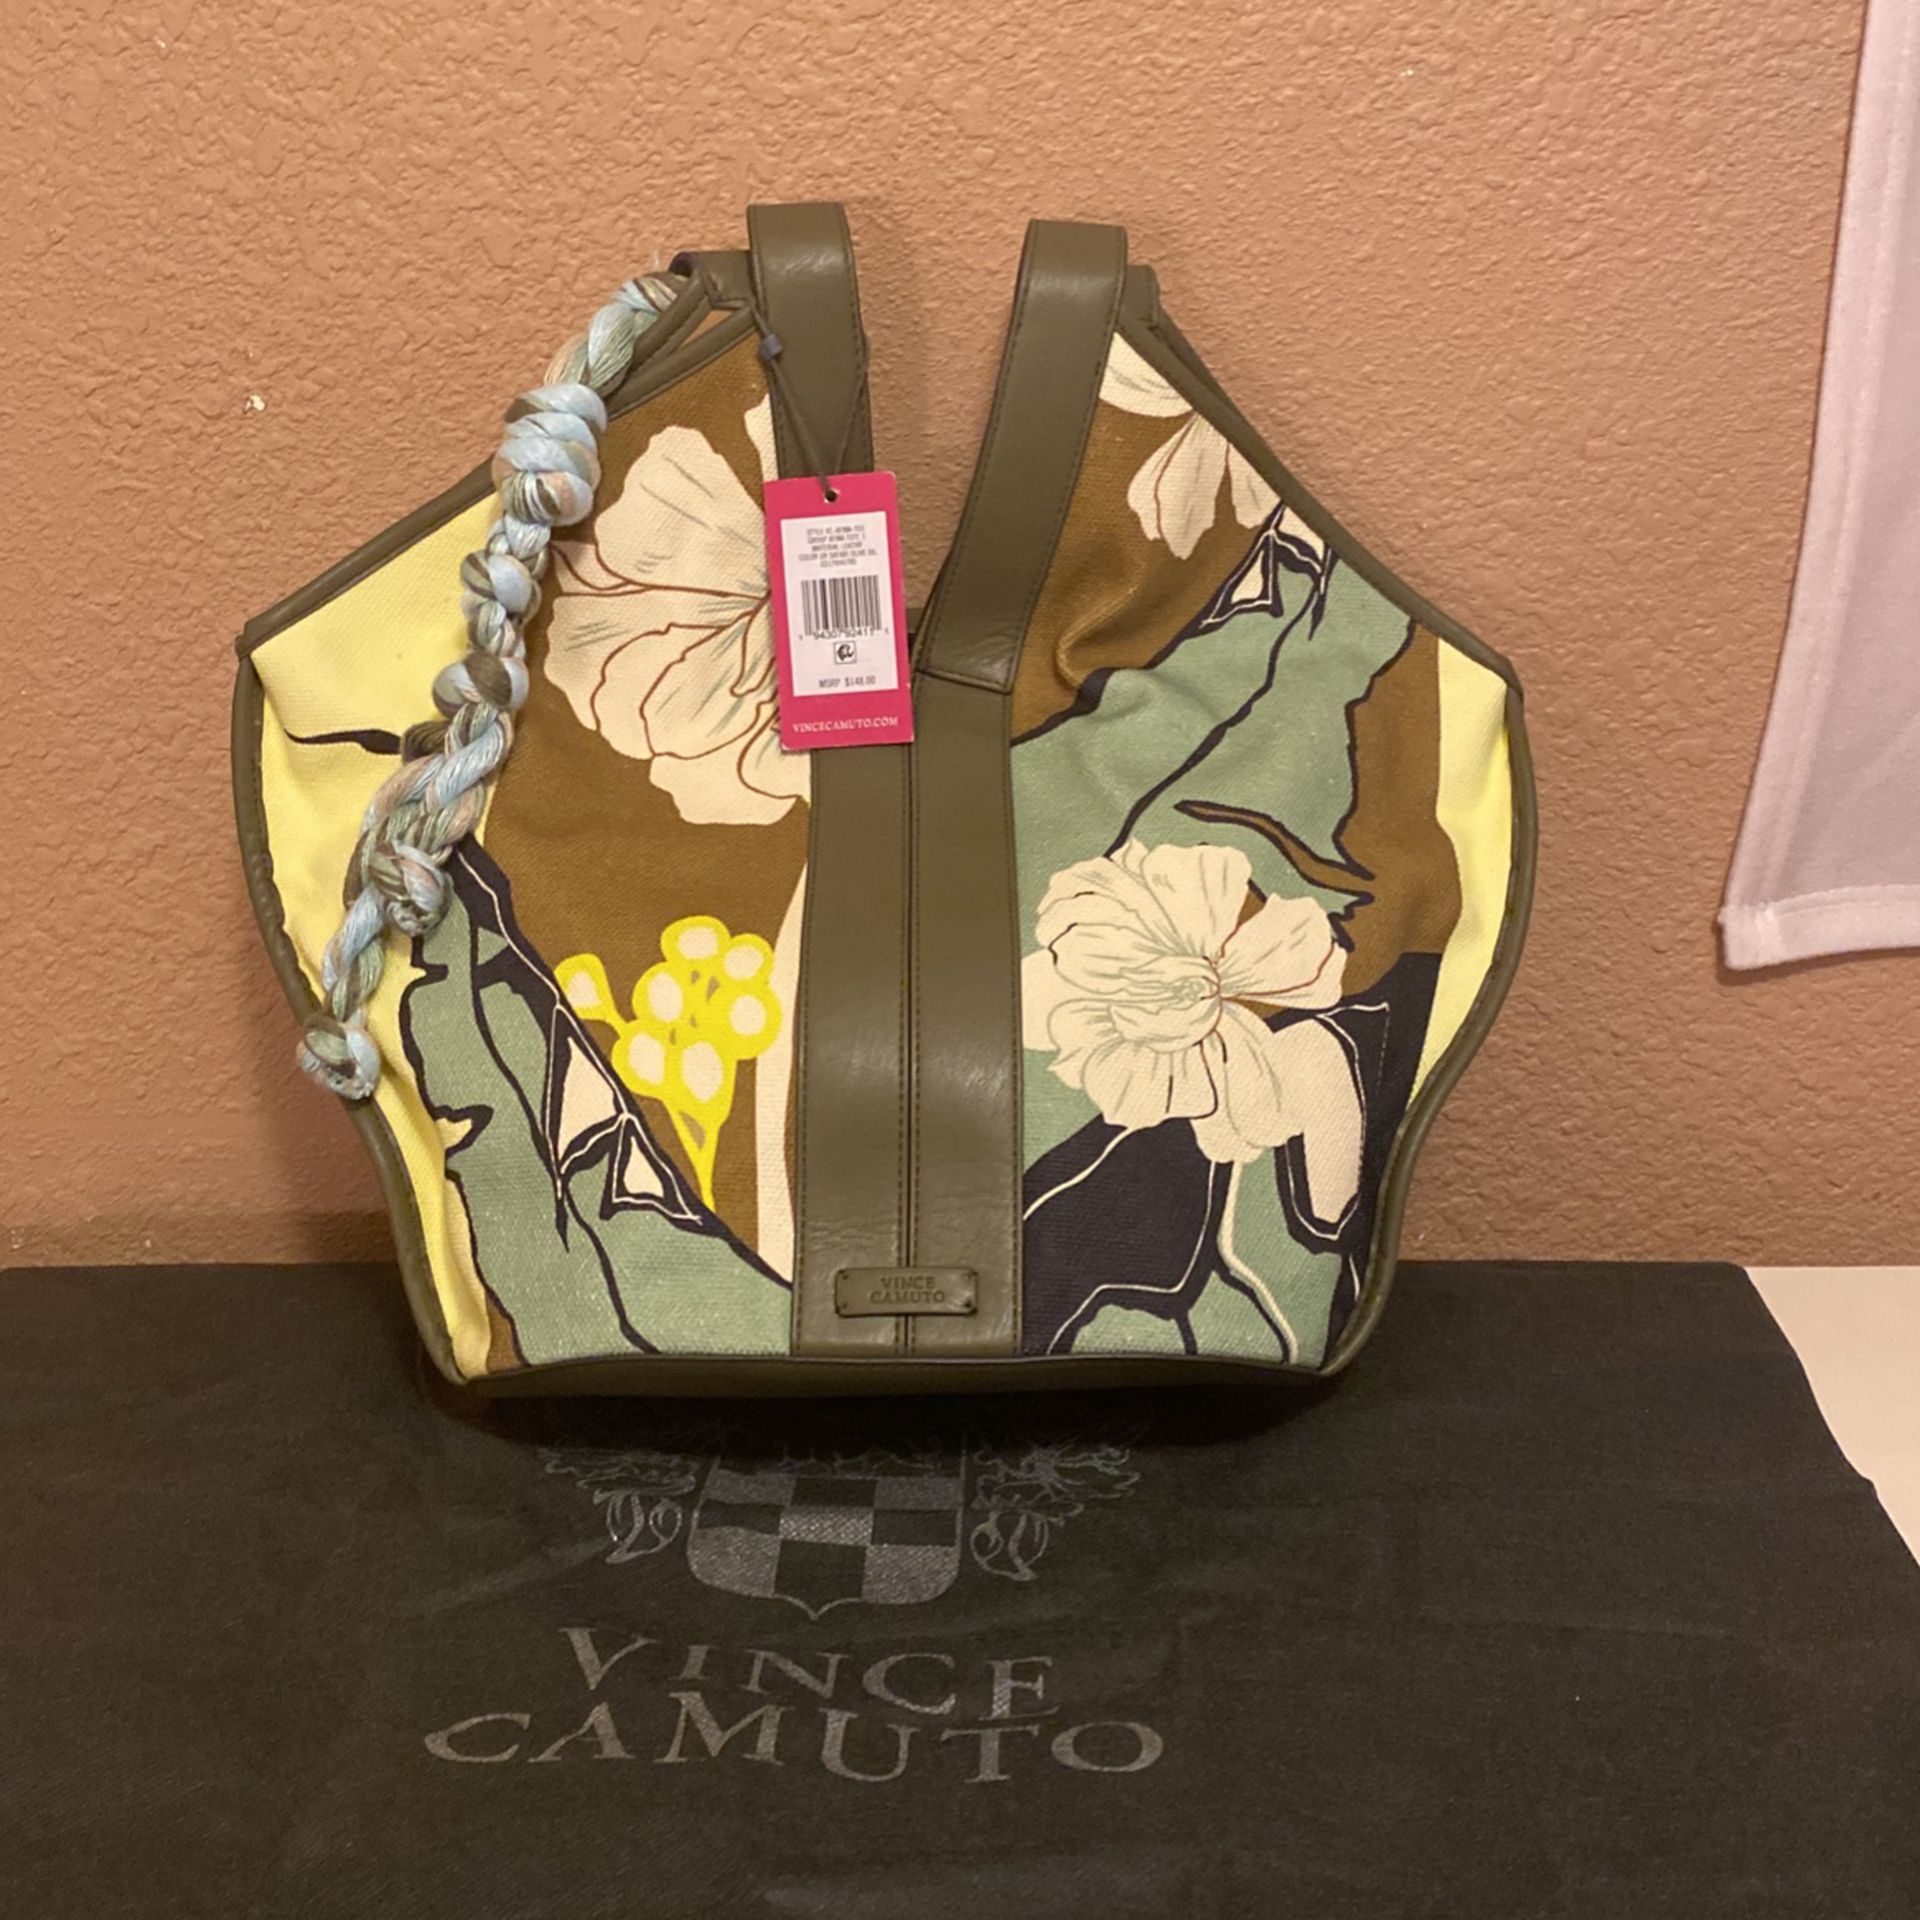 Vince Camuto Afina Tote Leather Shoulder Bag Or Hand Bag With Dust Bag $50 Firm C My Other Purses Ty